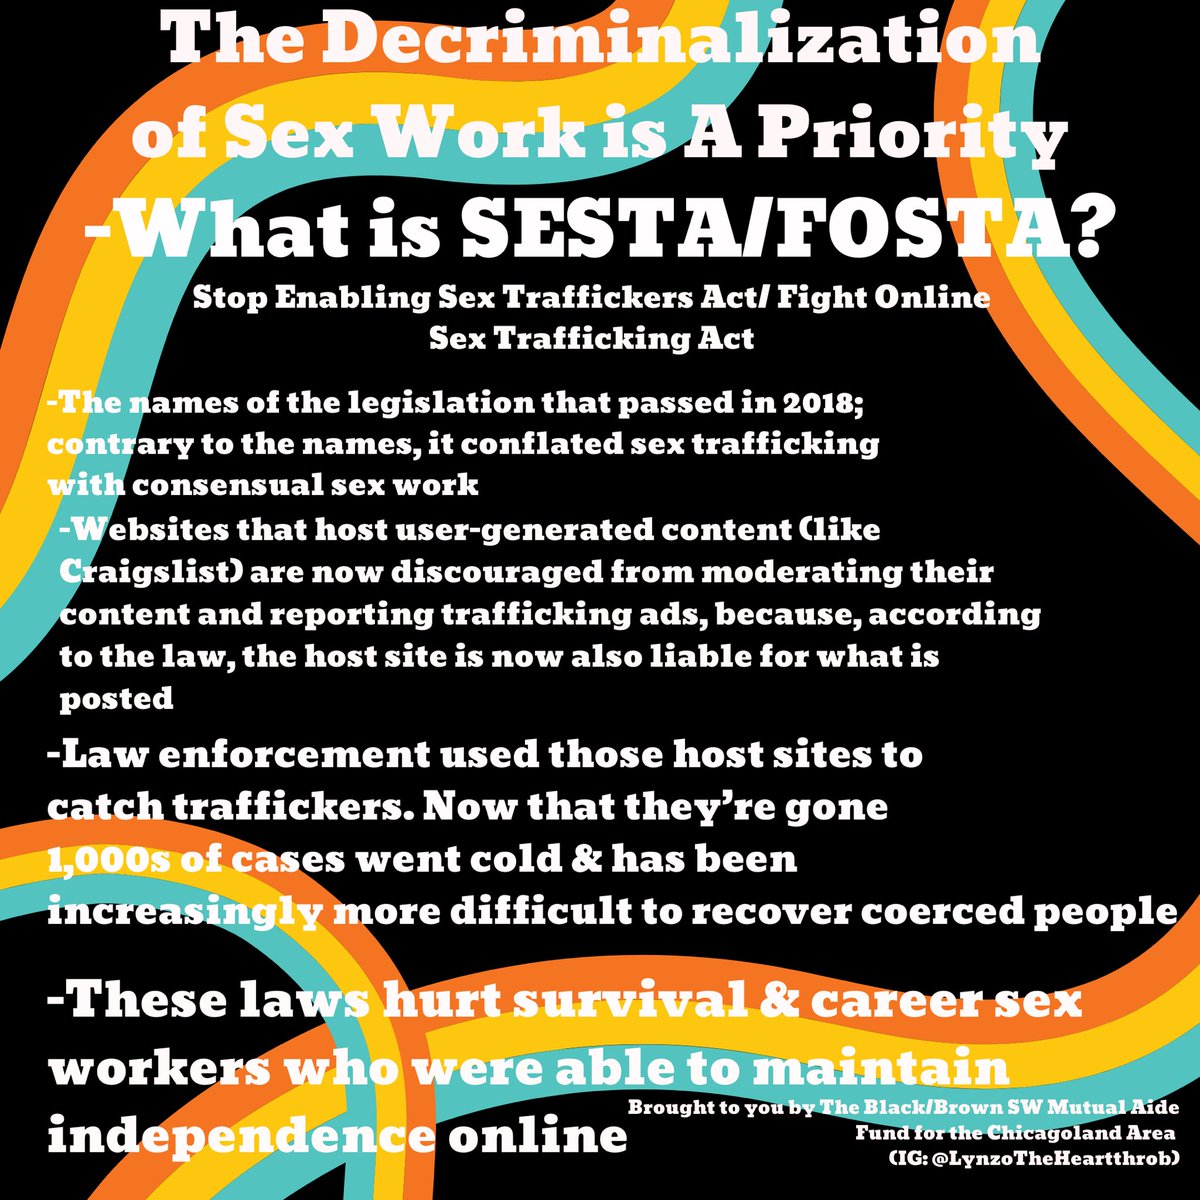 SESTA/FOSTA were laws passed under the guise of “saving trafficked persons,” but as soon as “Host Sites” became censored THOUSANDS of cases went cold -SWers used these sites to maintain independence the safest way possible-Finding traffickers has become increasingly hard